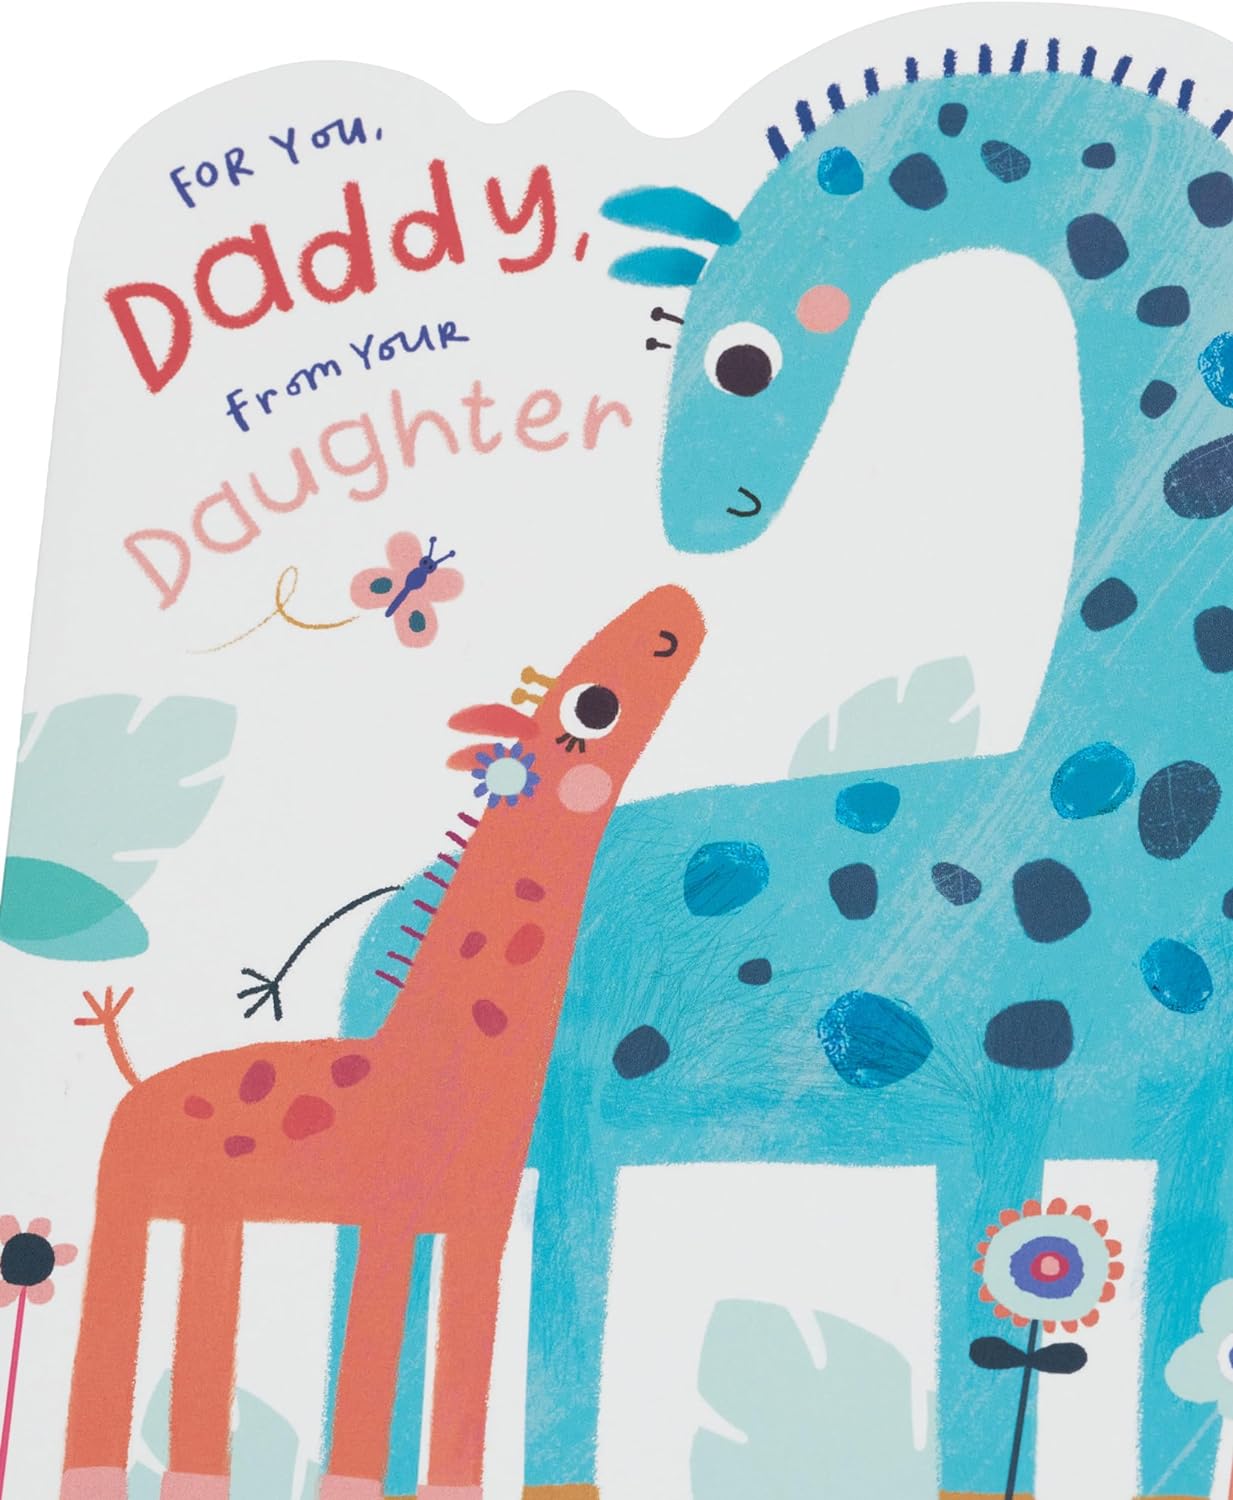 Adorable Design for Daddy from Your Daughter Father's Day Card